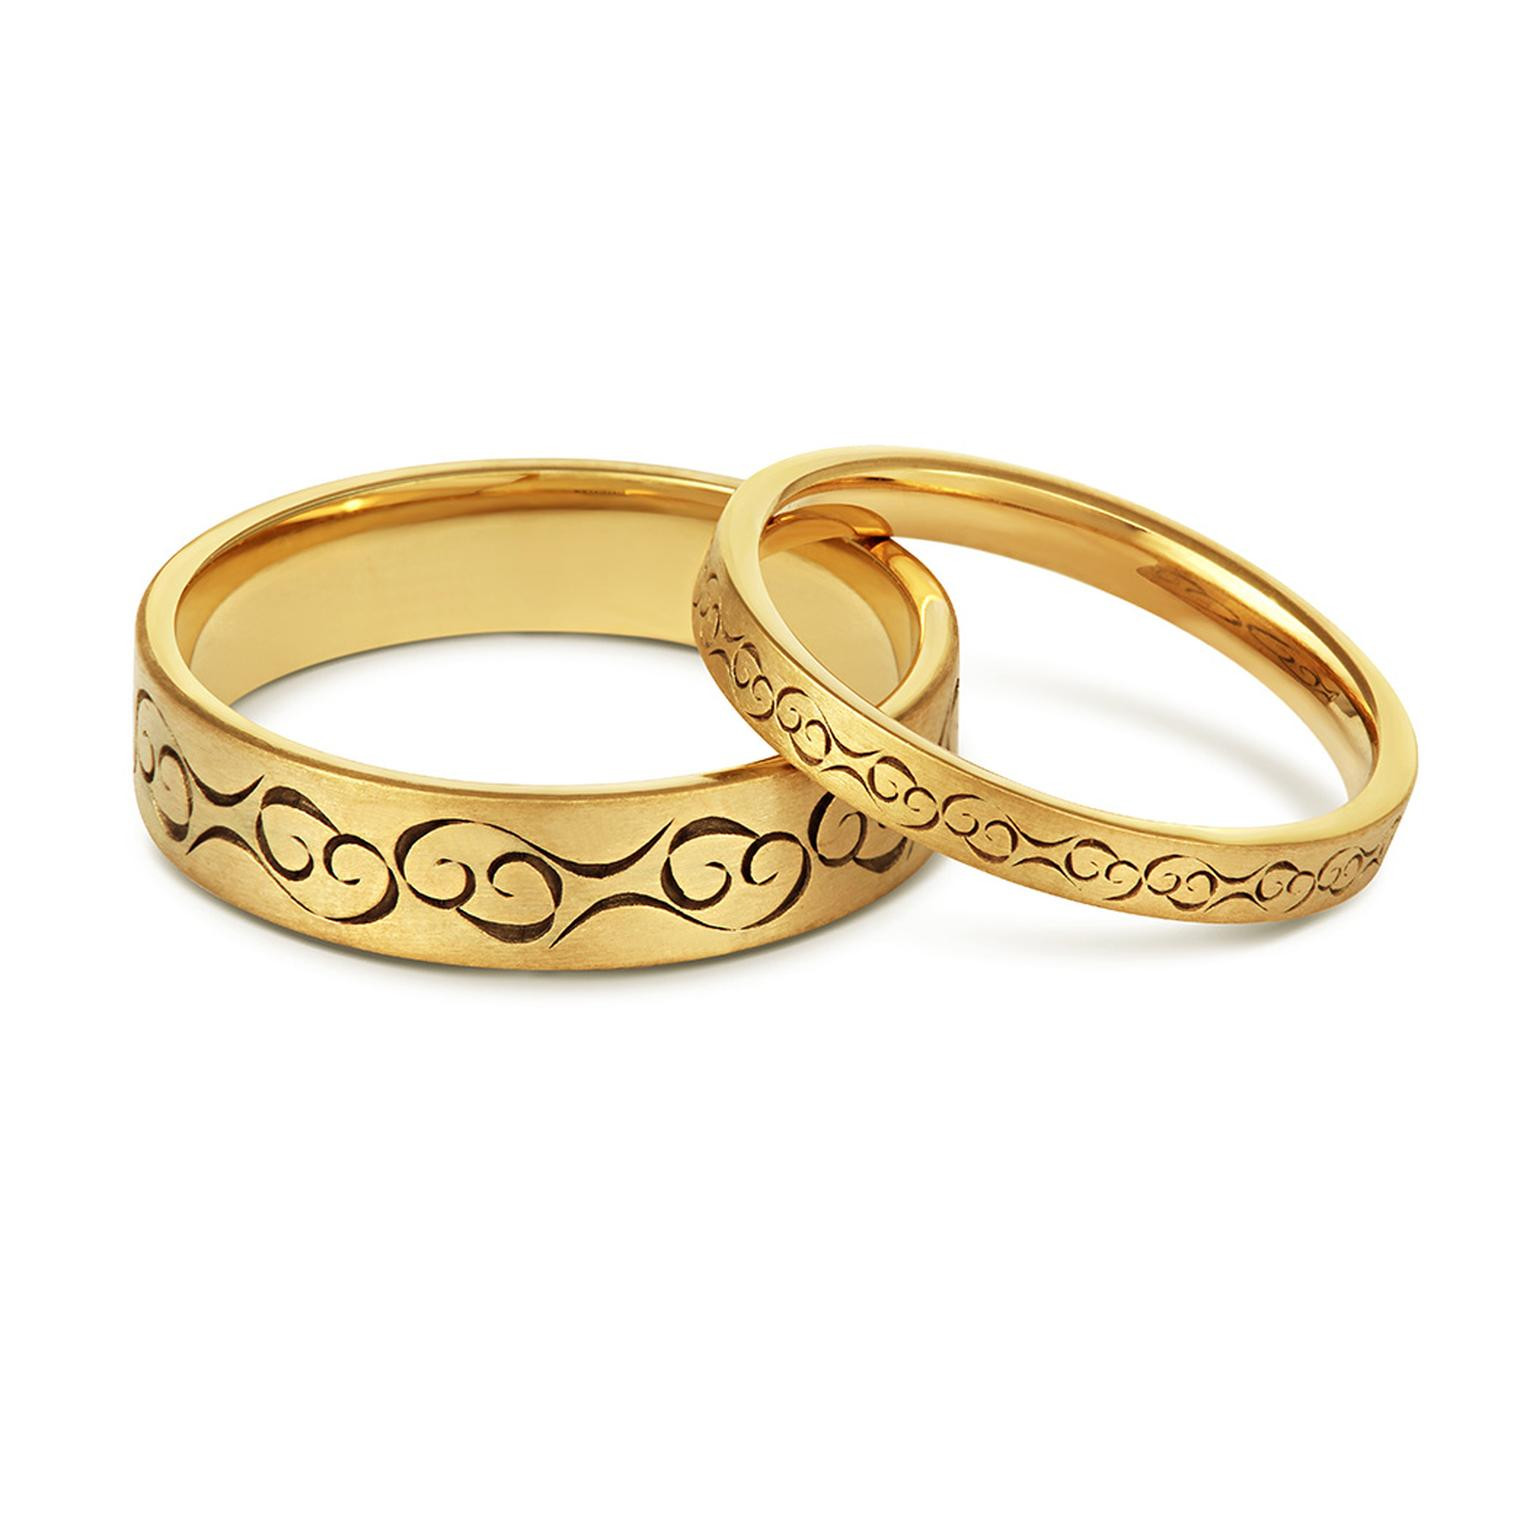 Weddings Rings
 The perfect wedding bands for same couples